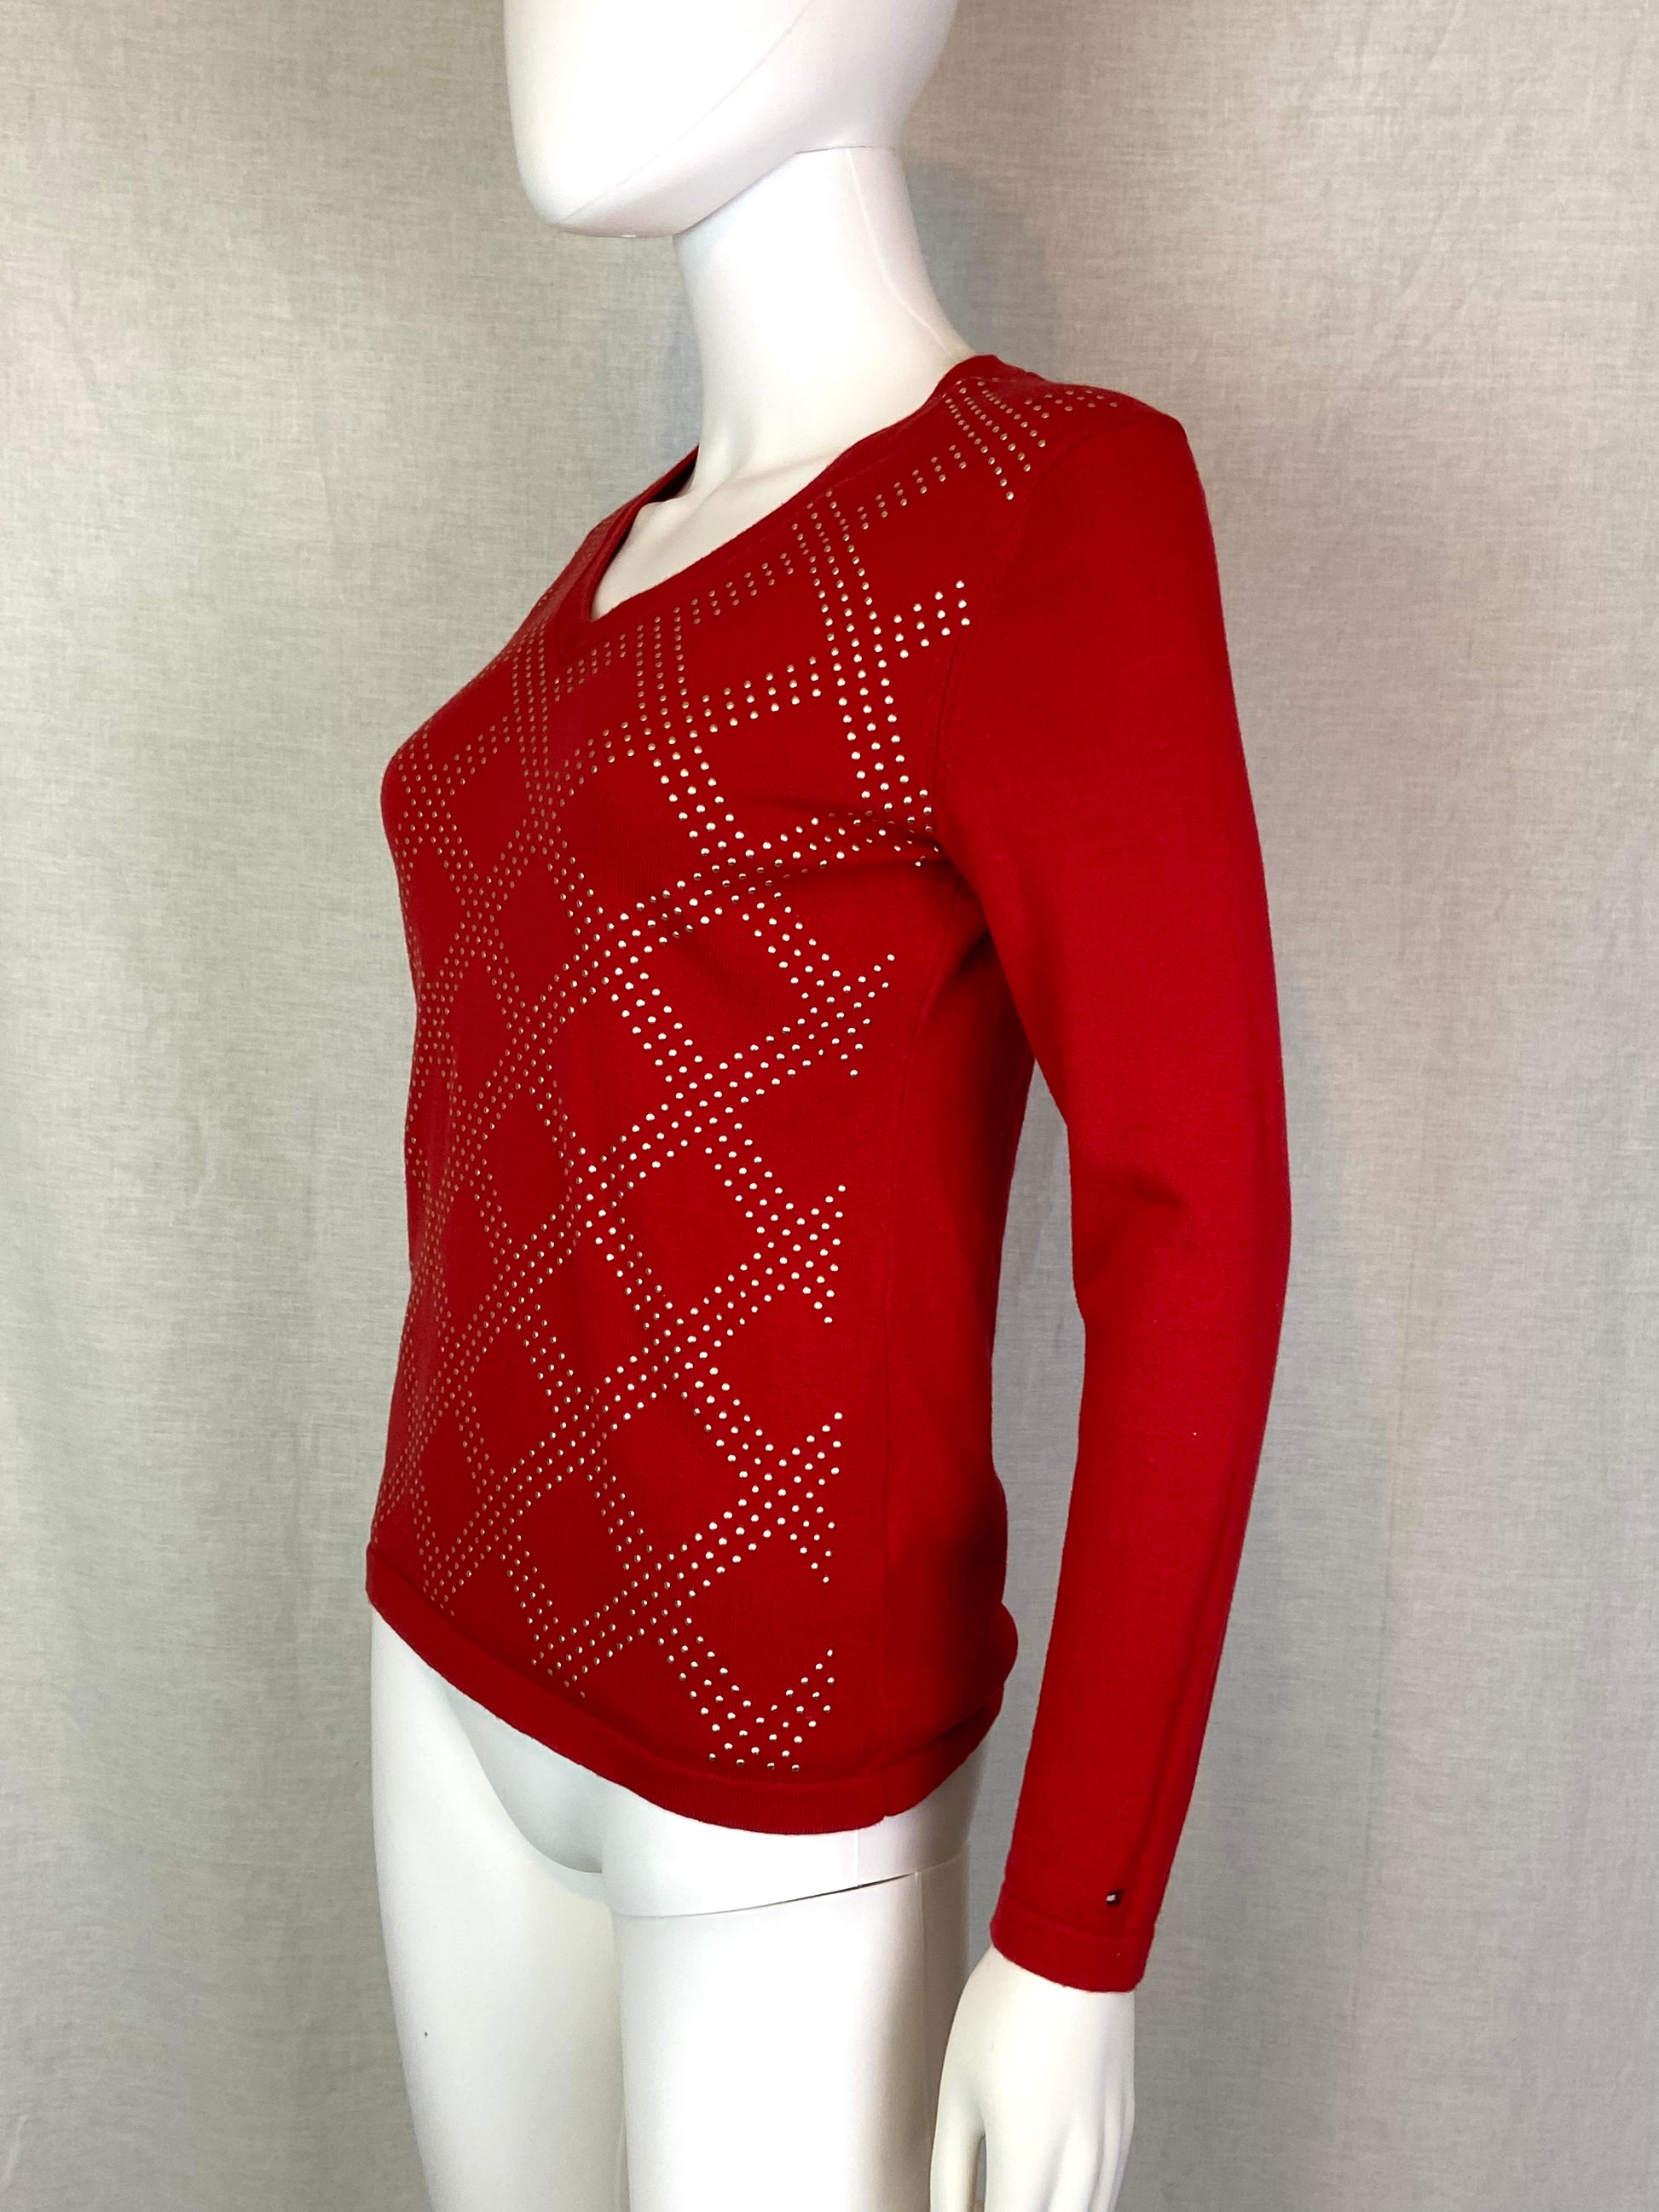 Tommy Hilfiger Studded Red Top Small ABBY ESSIE STUDIOS